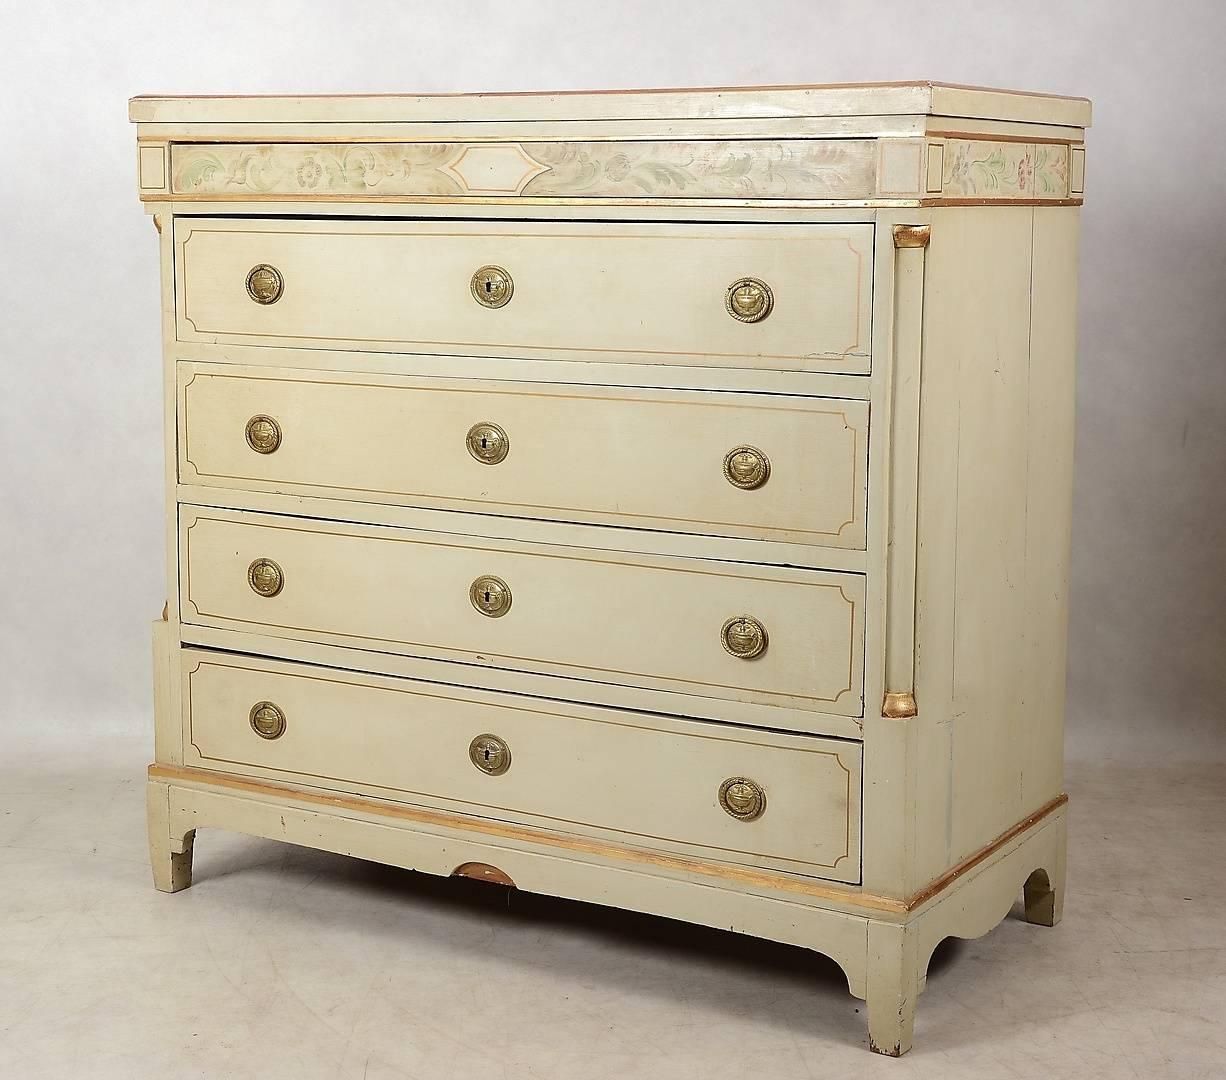 Hand-Painted Swedish Gustavian Painted Chest of Drawers Commode Tallboy 19th Century